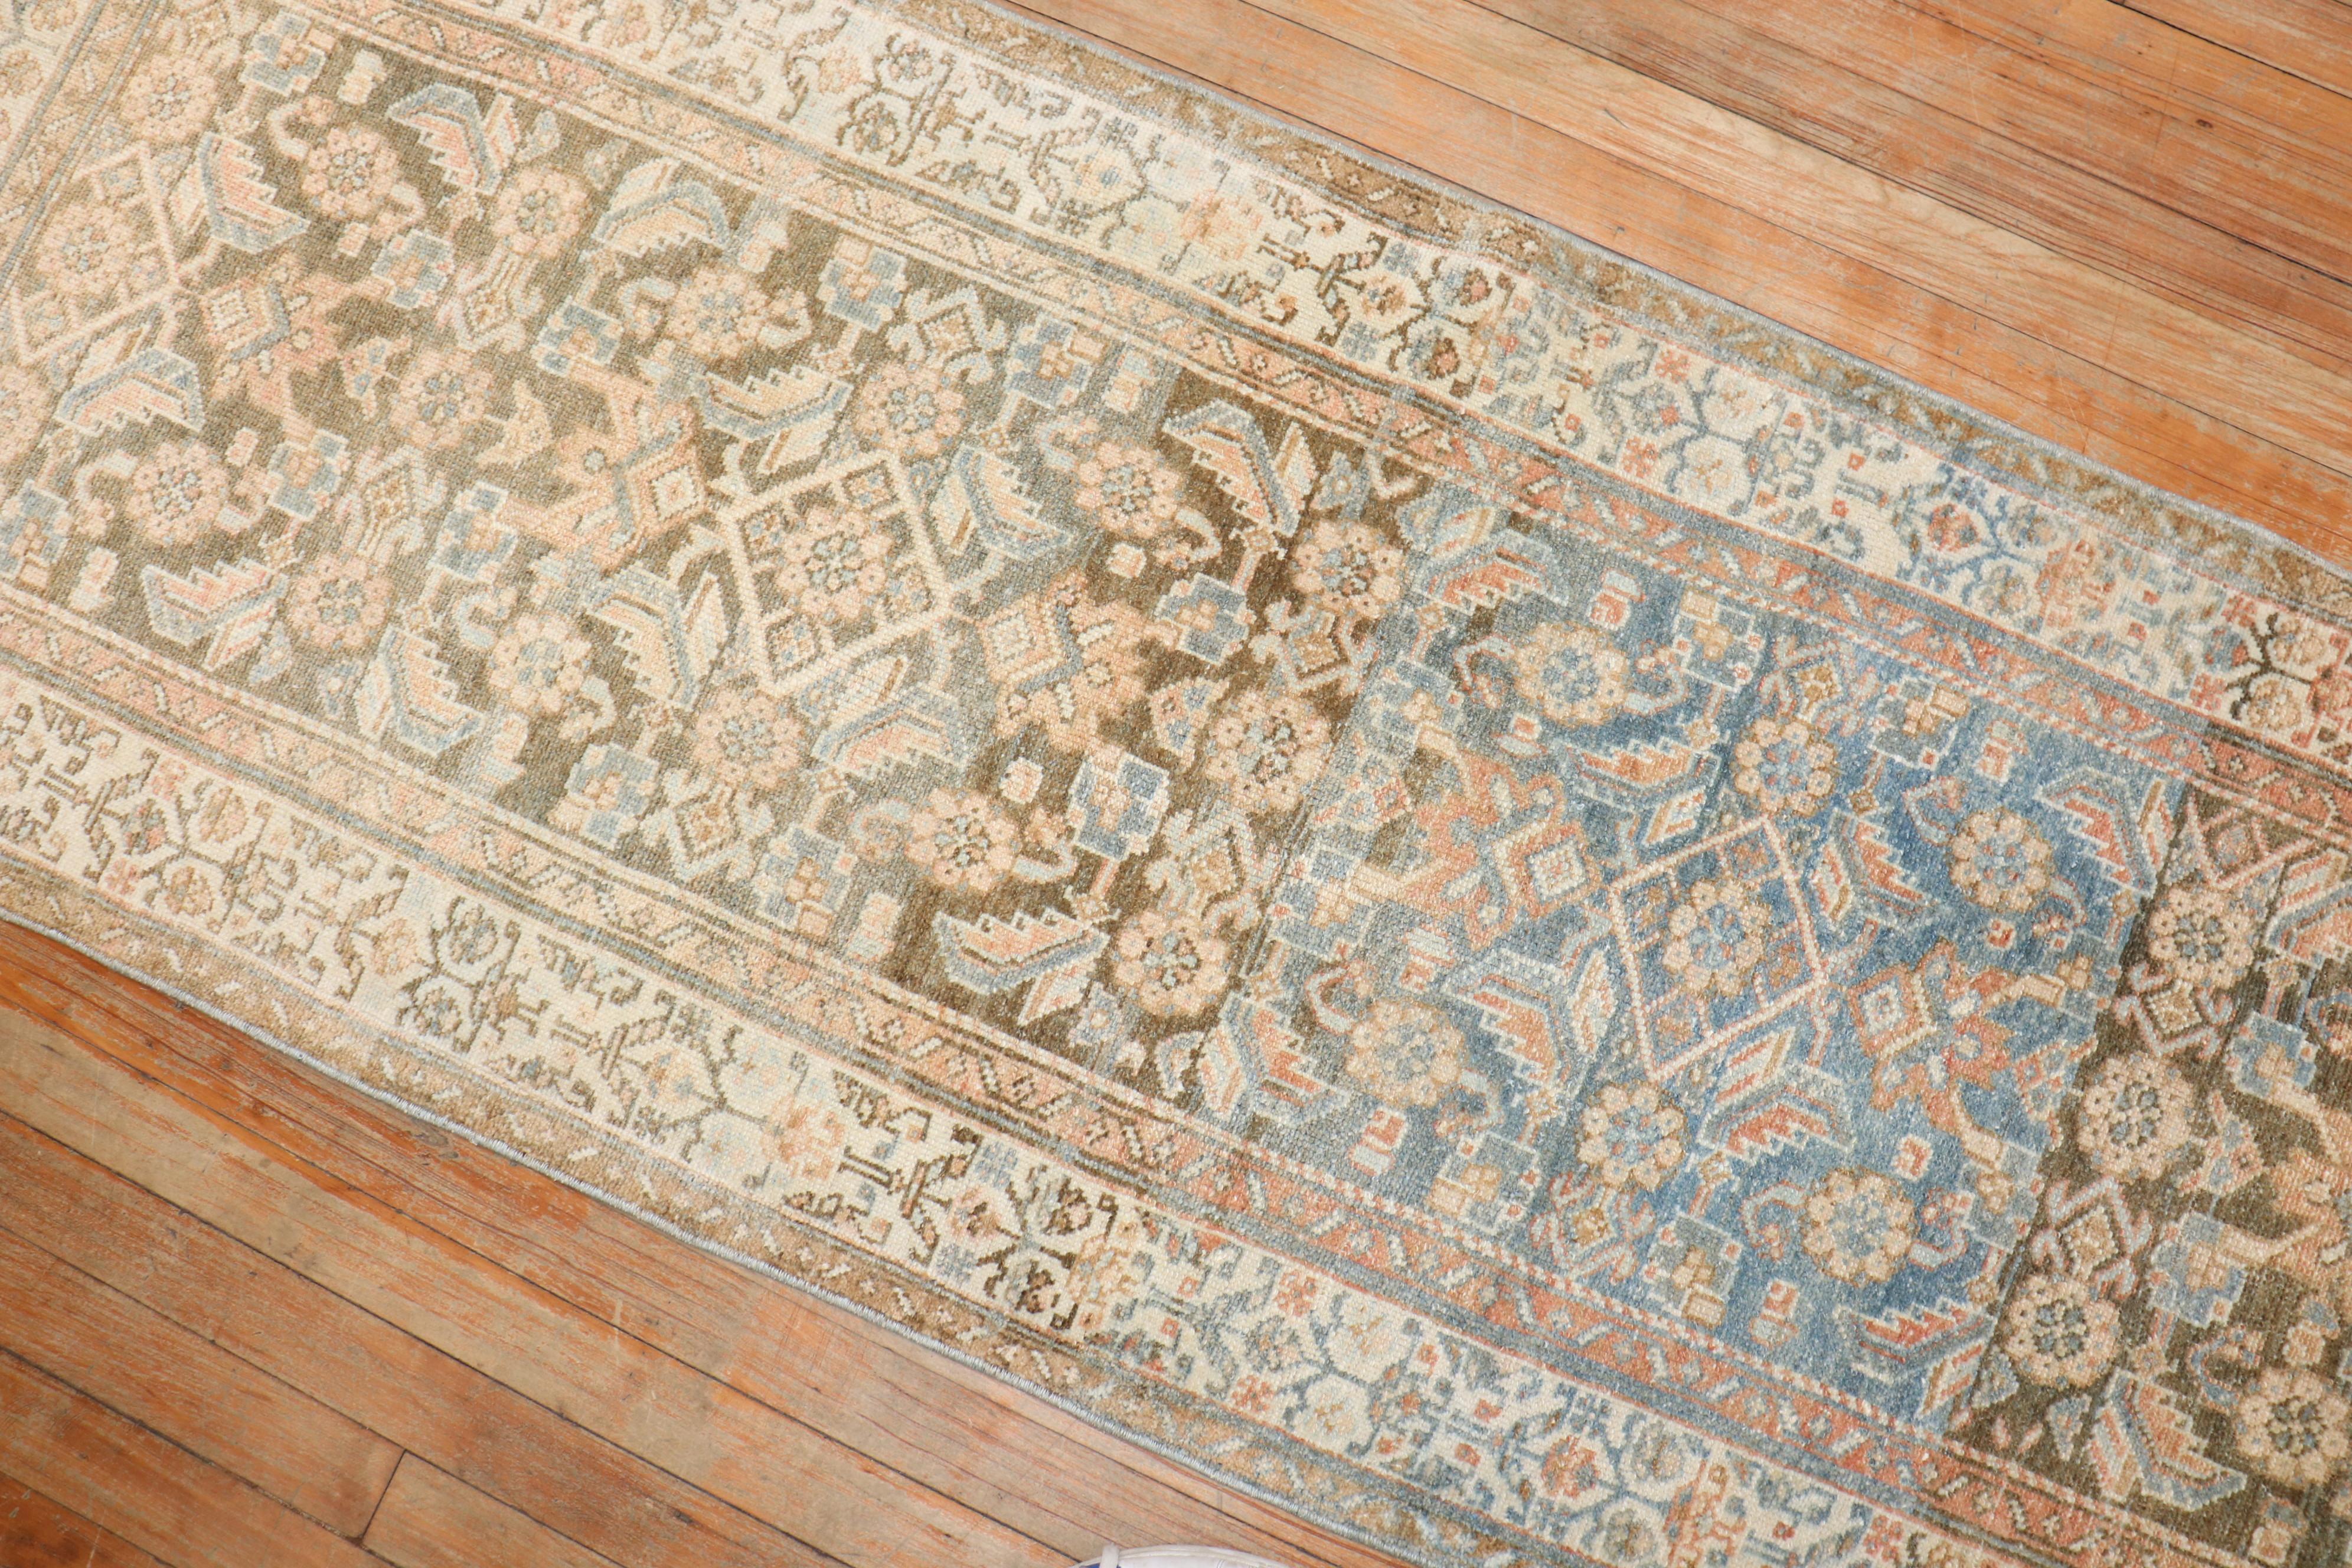 Early 20th century Persian Malayer rug in soft blue, brown, and apricot tones

Measures: 2'5'' x 6'7''.

 